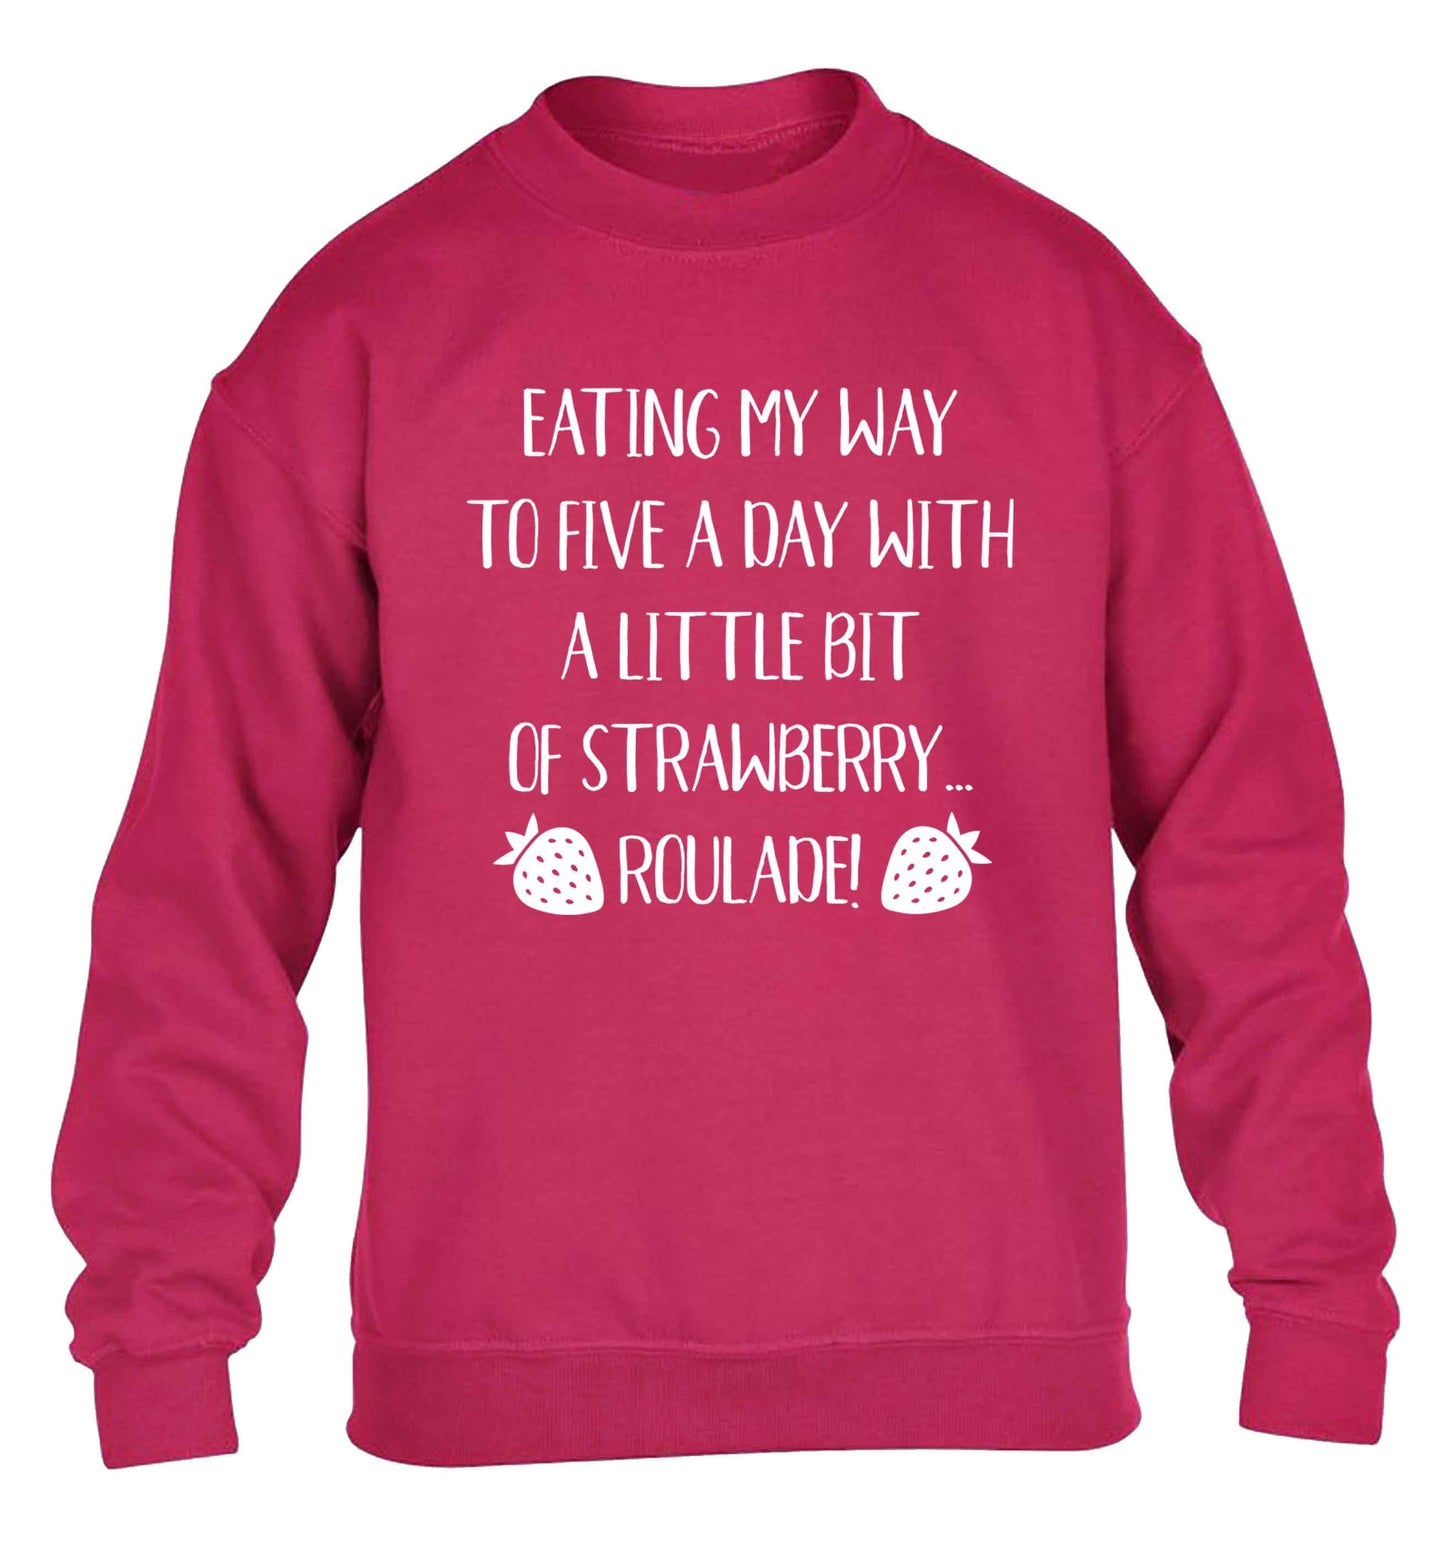 Eating my way to five a day with a little bit of strawberry roulade children's pink sweater 12-13 Years